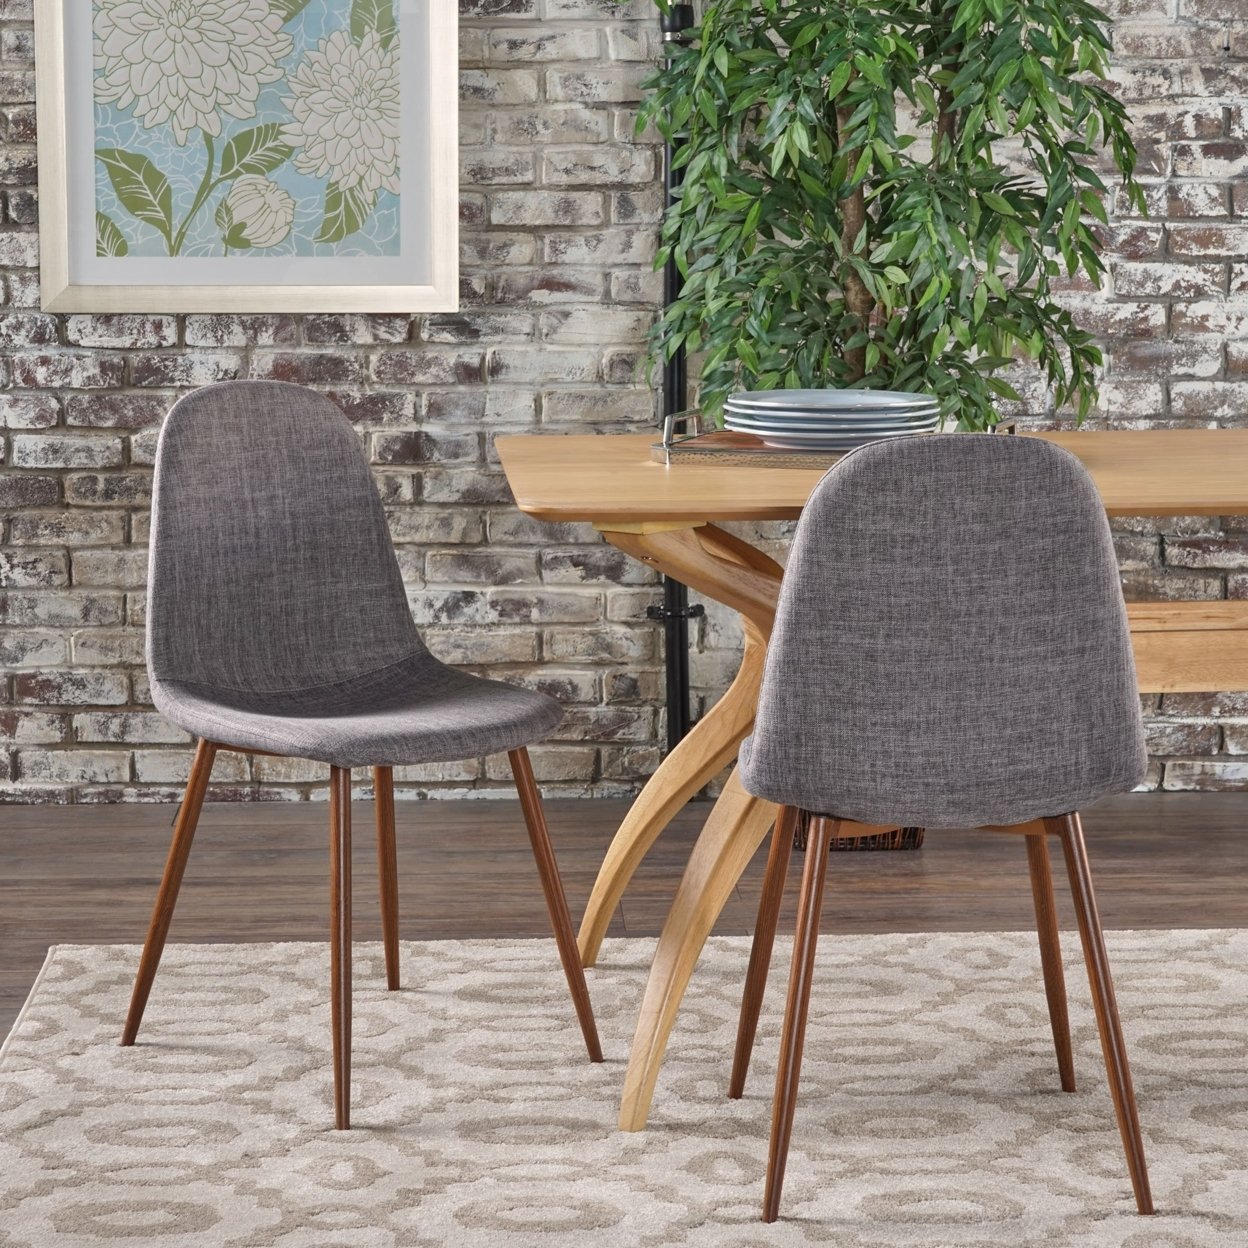 Resta Mid Century Fabric Dining Chairs With Wood Finished Metal Legs (Set Of 2) - Muted Blue/Light Brown